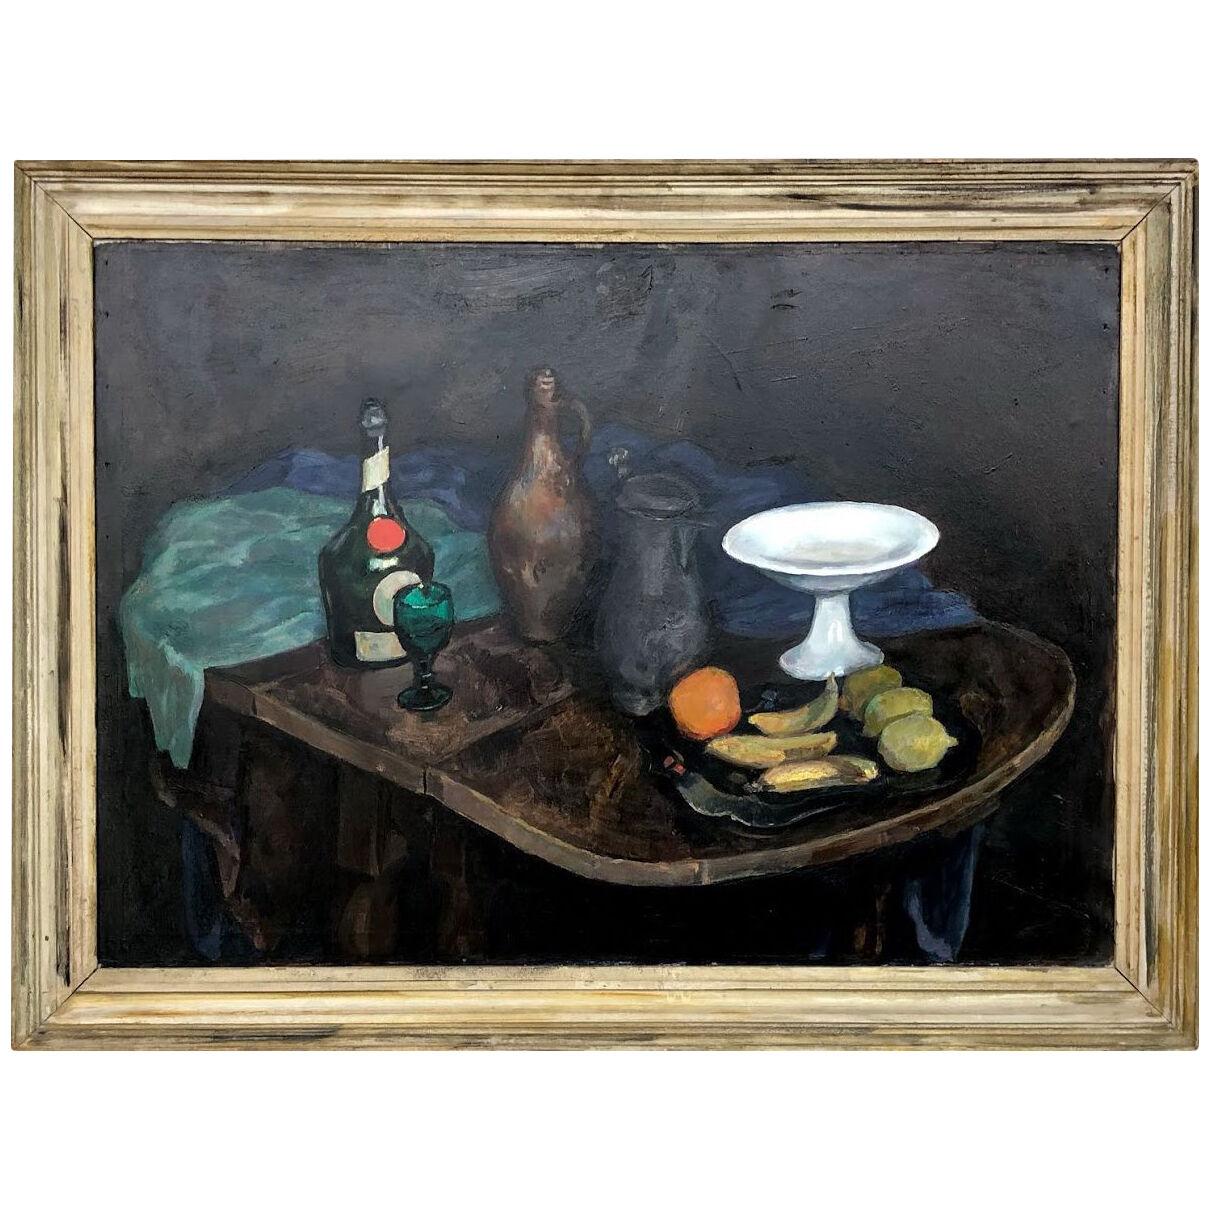 "Still life with table" by Jan Sluijters